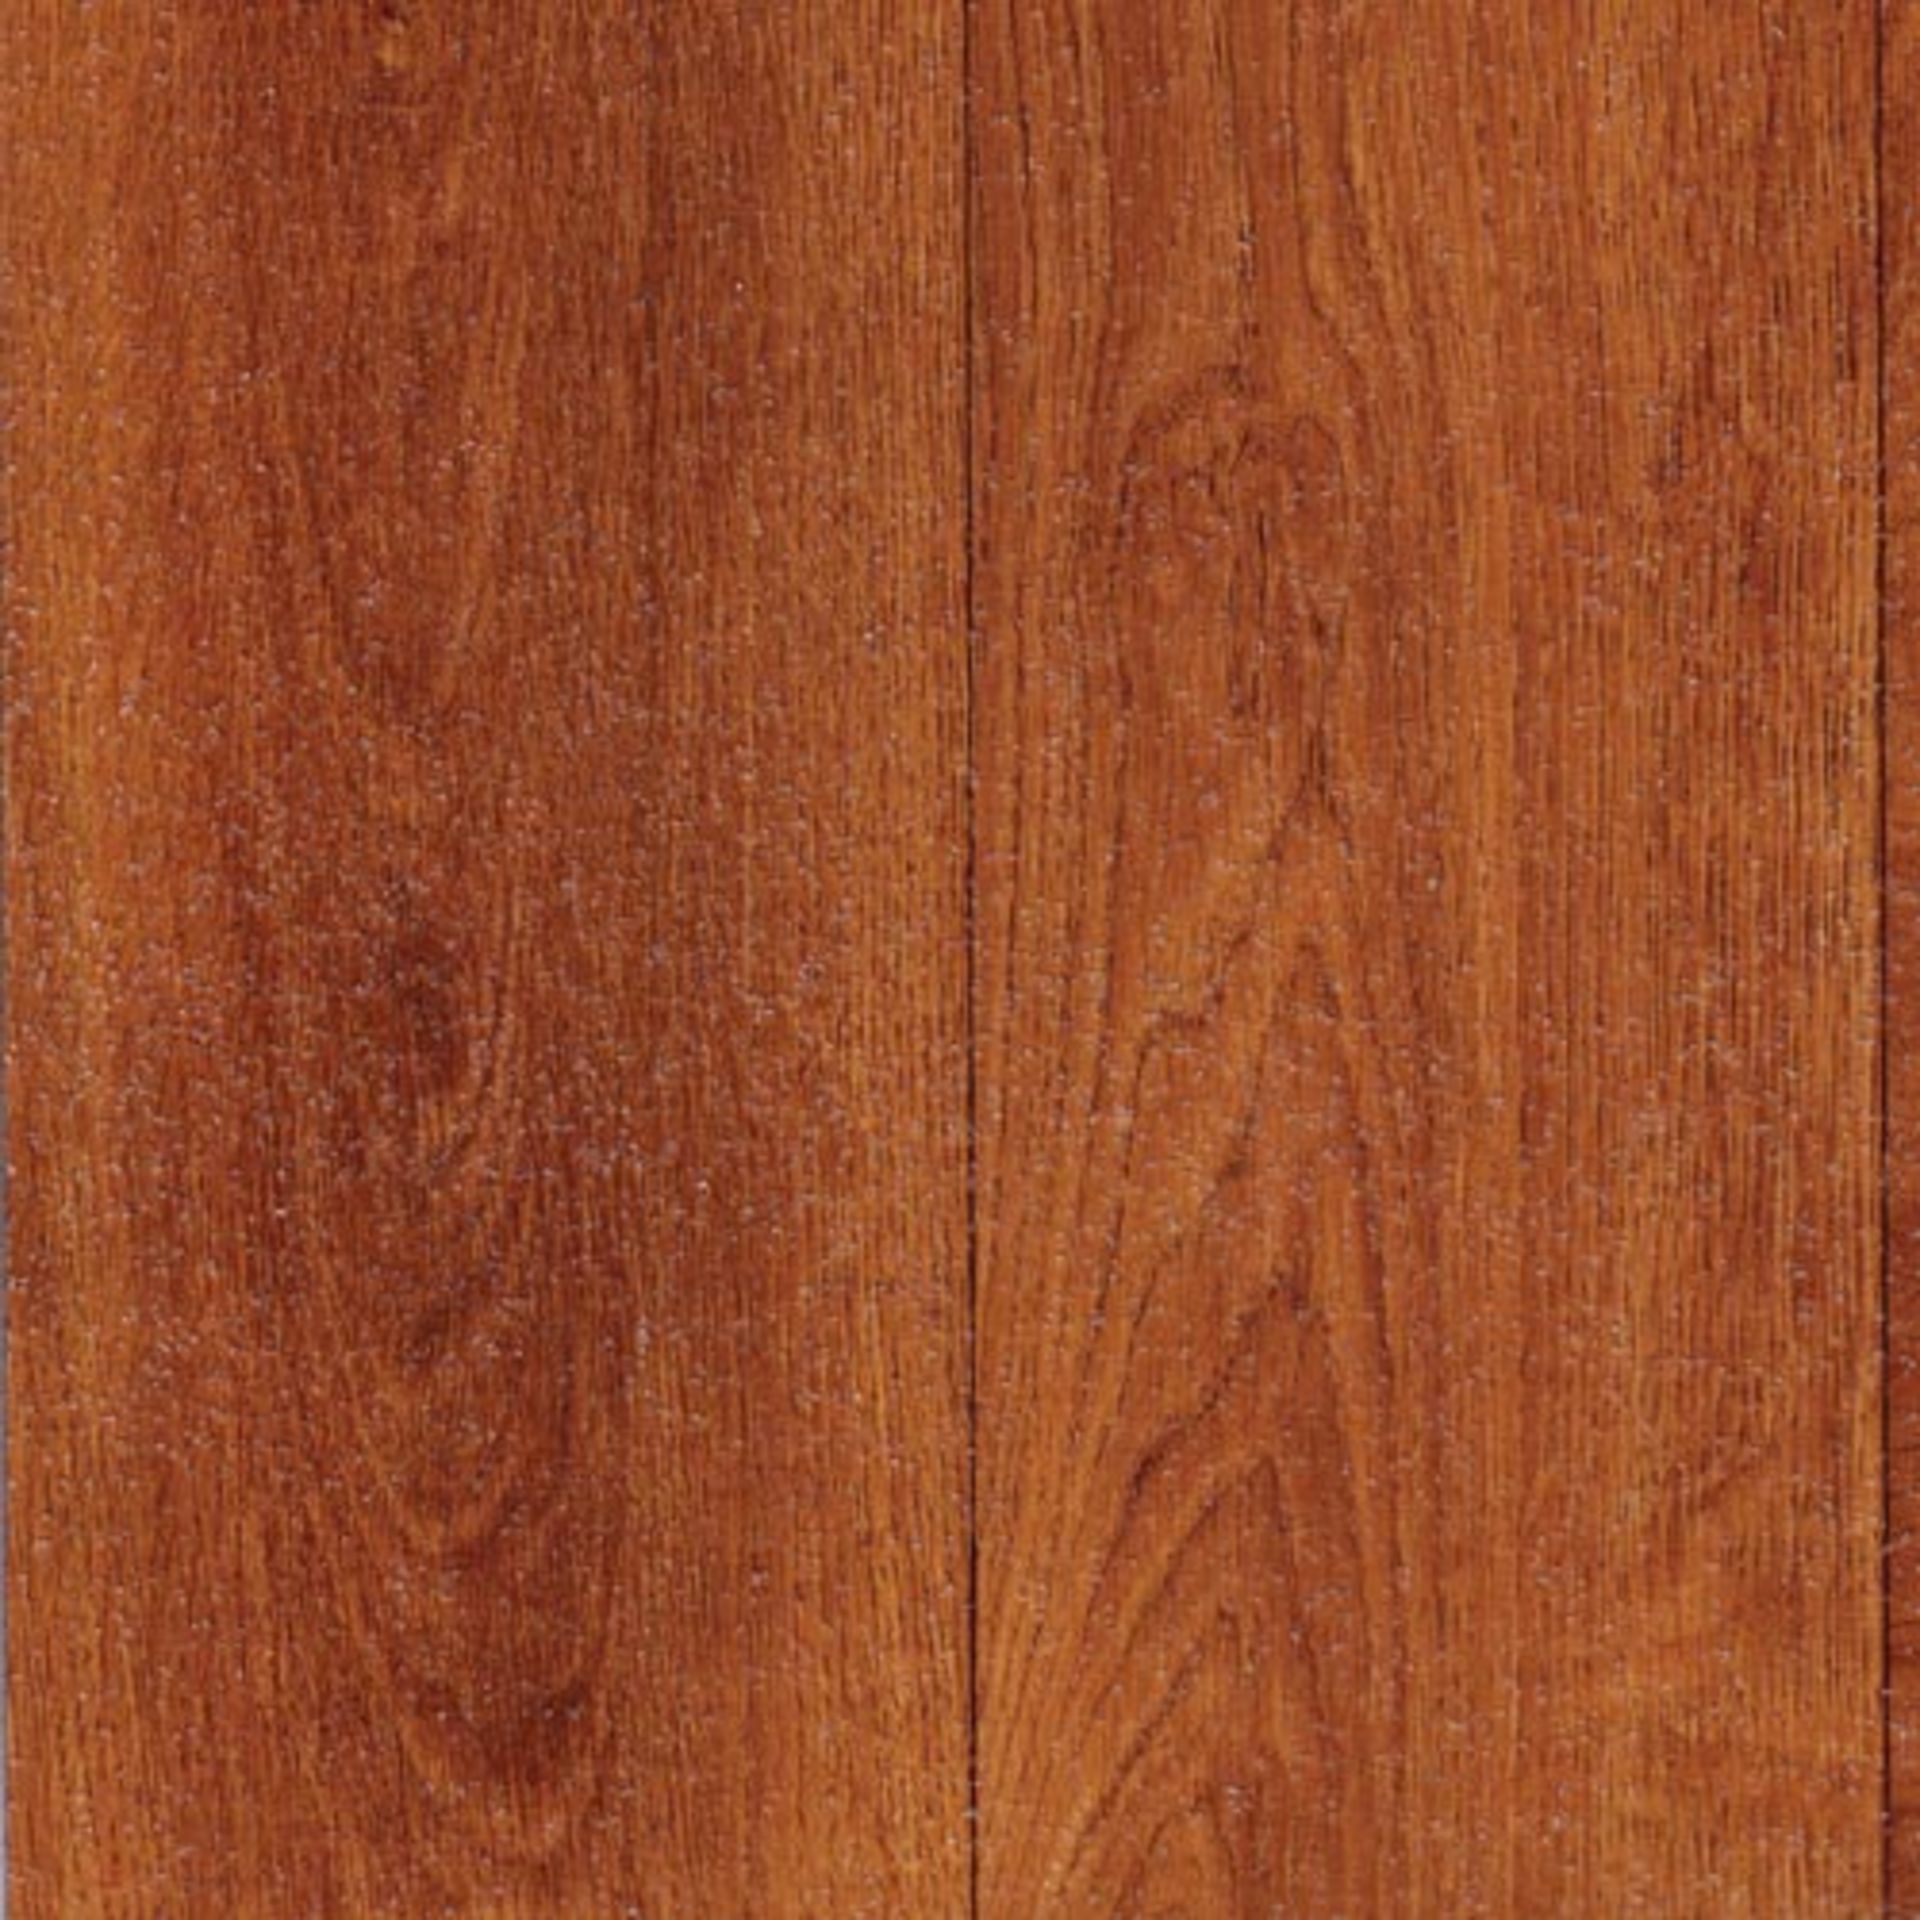 Tarkett Wood - Traditional Oak Brown The Safetred Design family allows specifiers and end users to